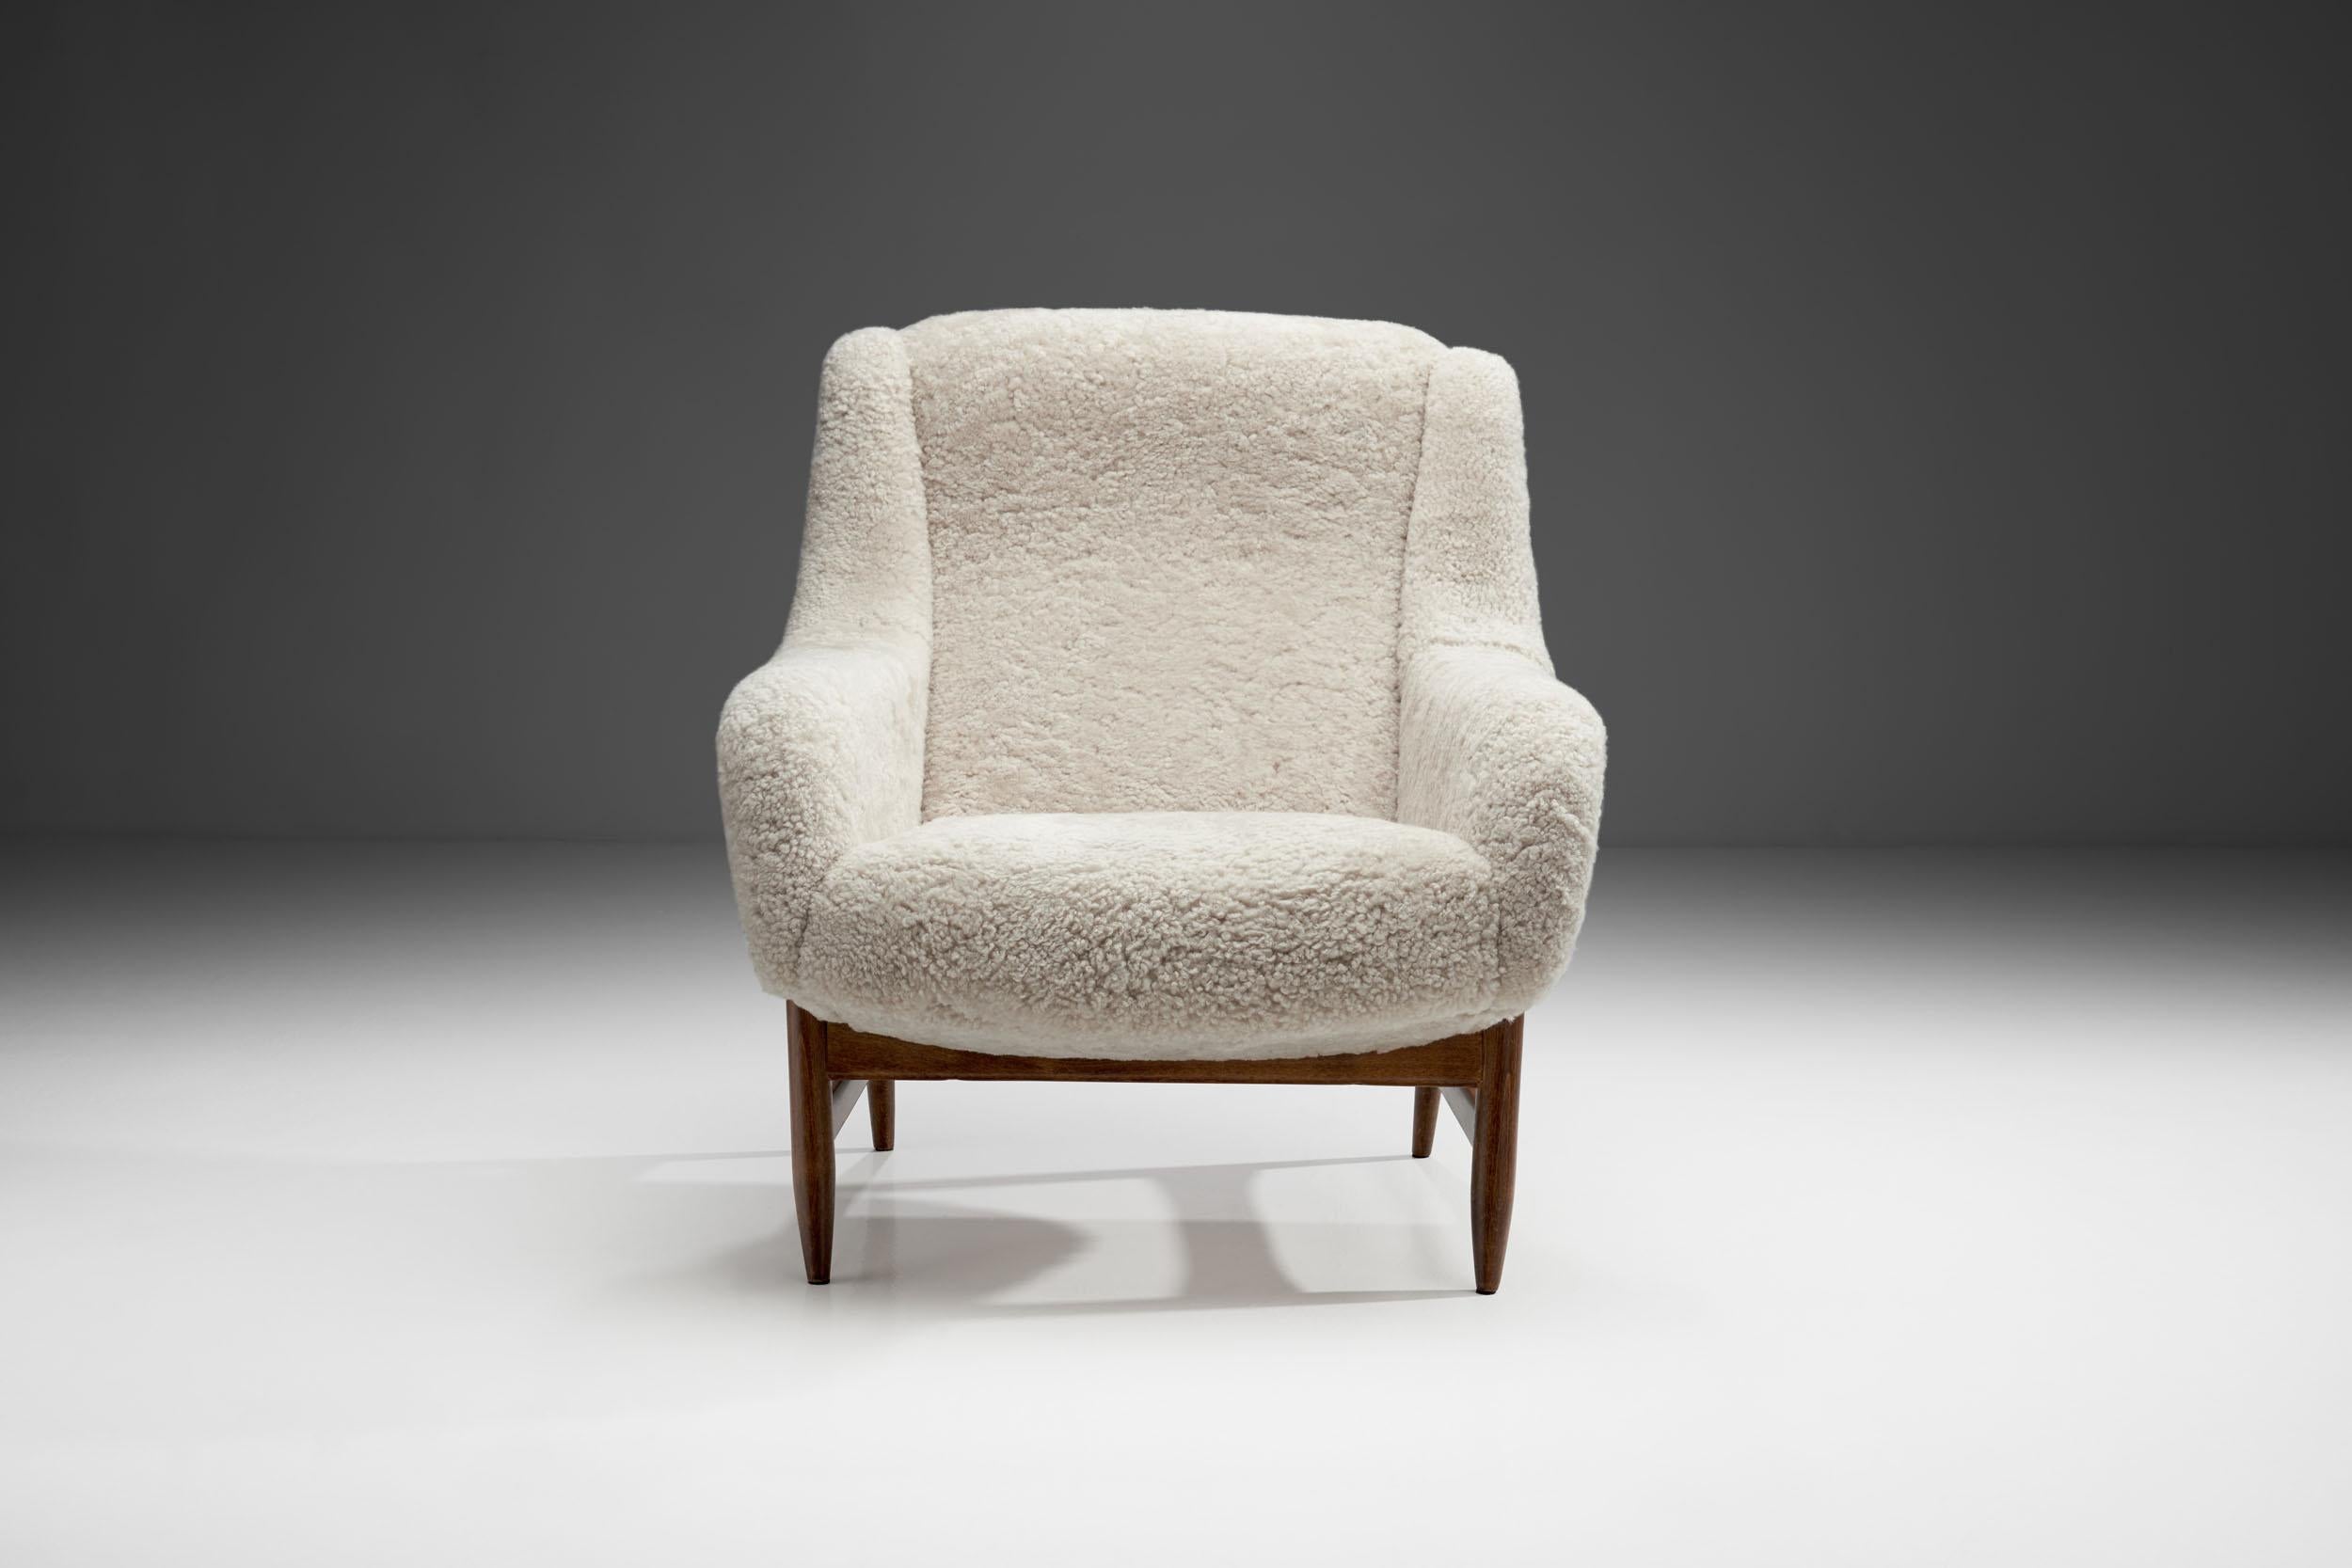 bengt ruda’s limited-edition cavelli chair